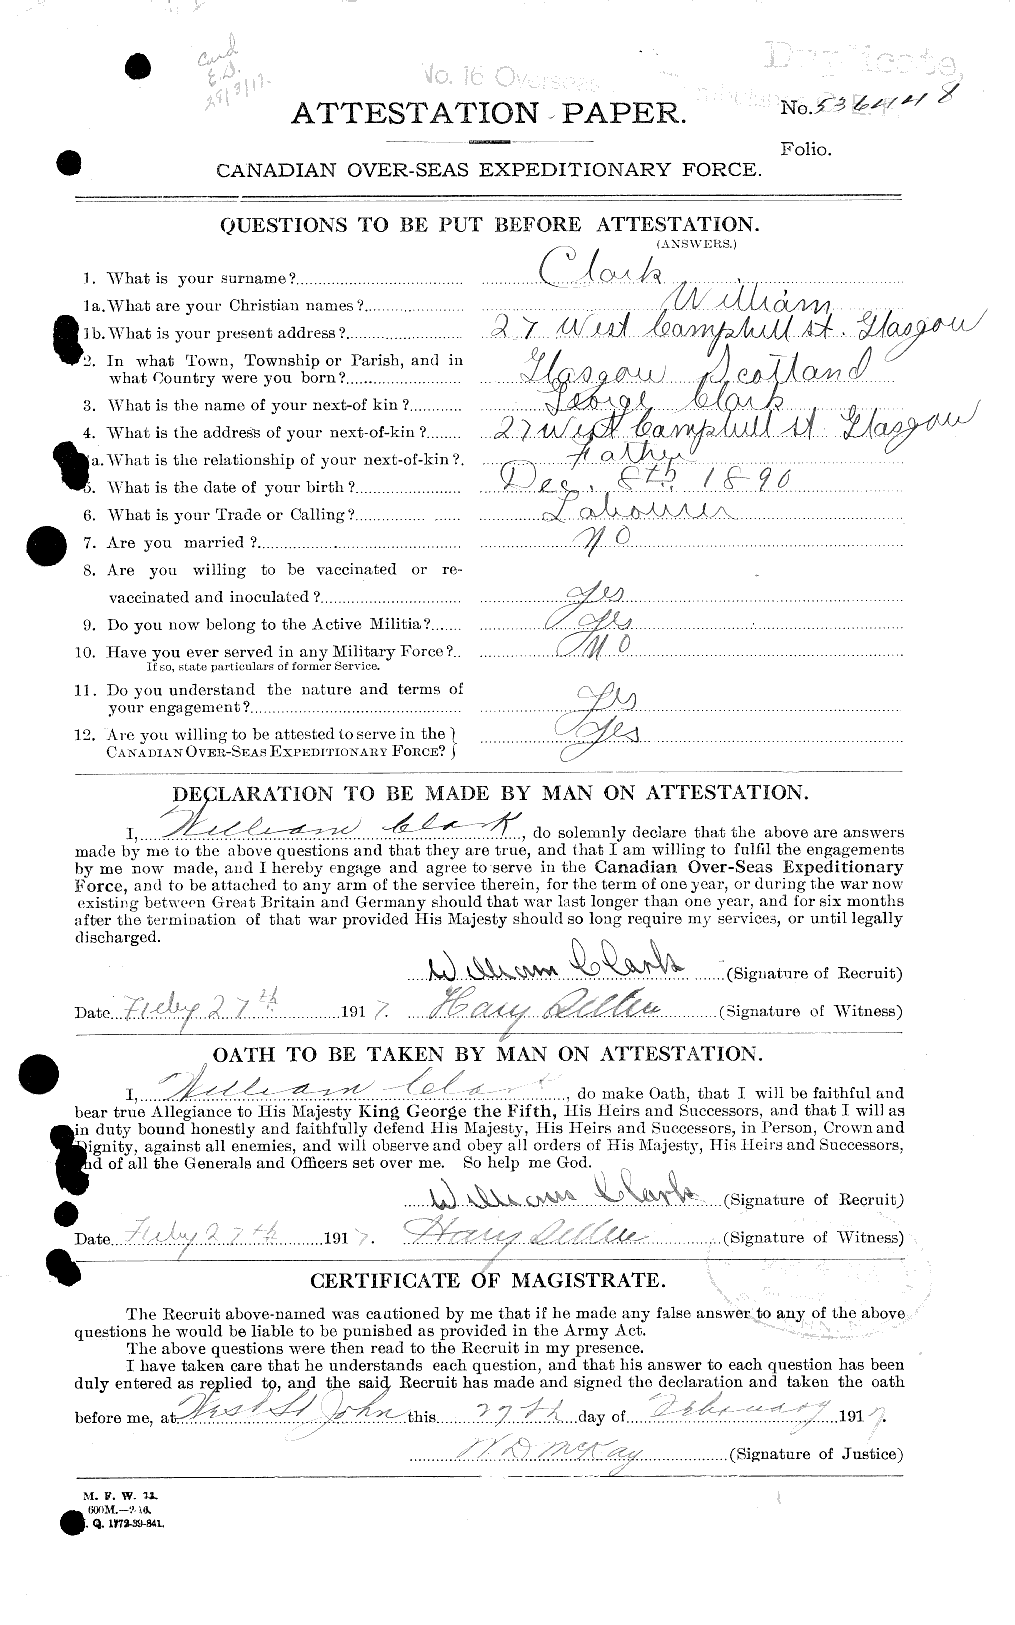 Personnel Records of the First World War - CEF 023551a